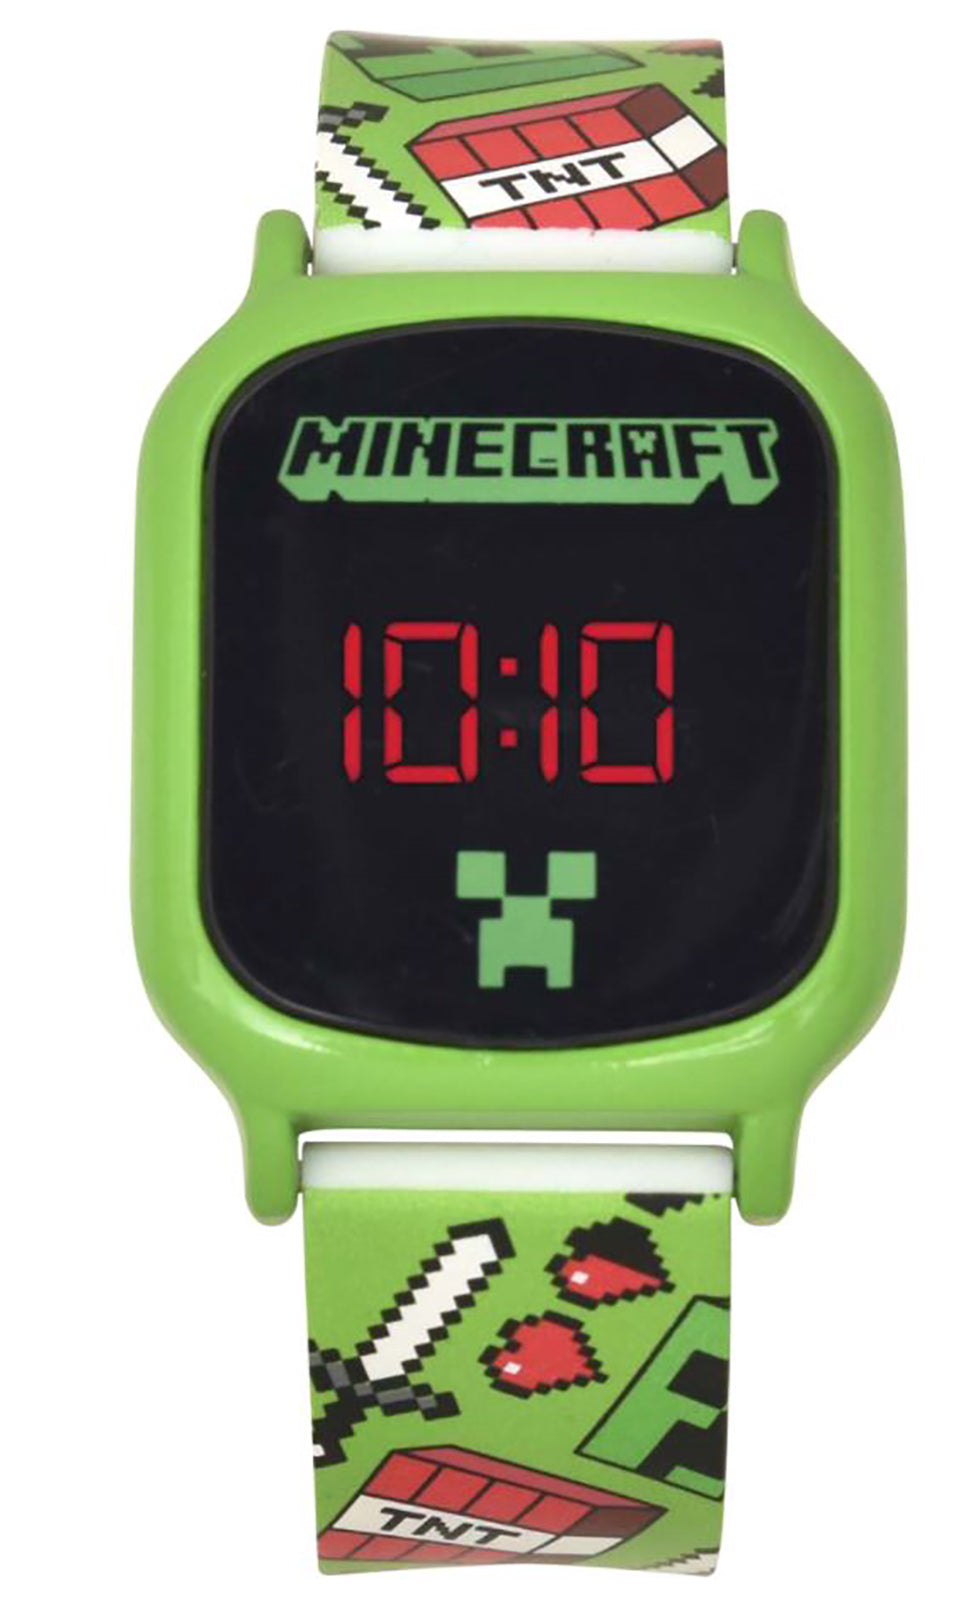 Minecraft LED Digital Touch Screen Watch